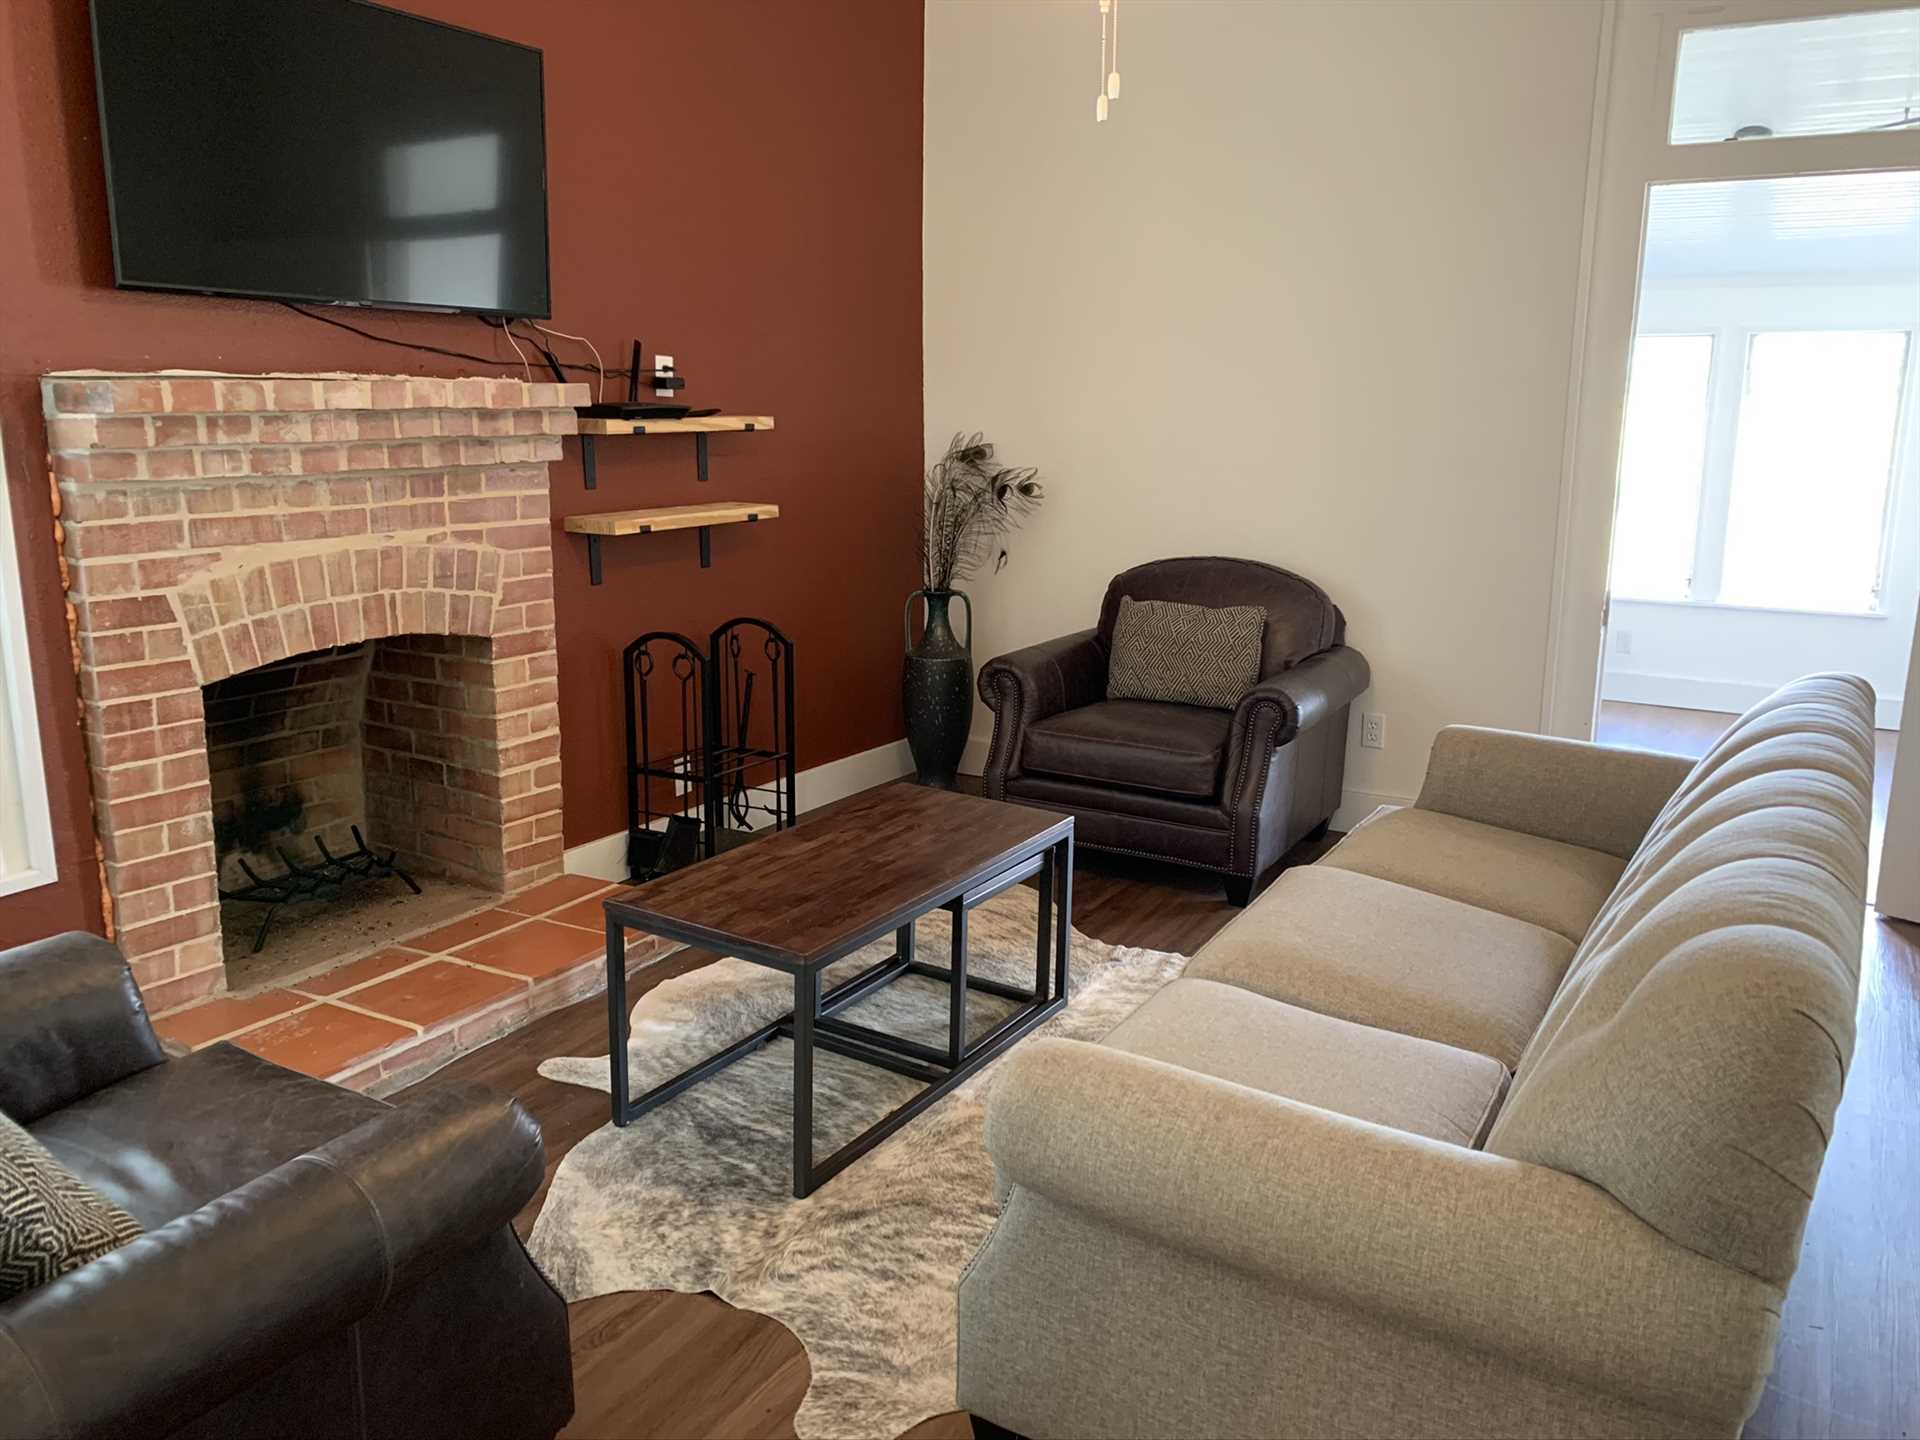                                                 Wifi and the Roku-enhanced TV will keep your crew entertained in the comfy living area, and the electric fireplace will keep chilly nights at bay.